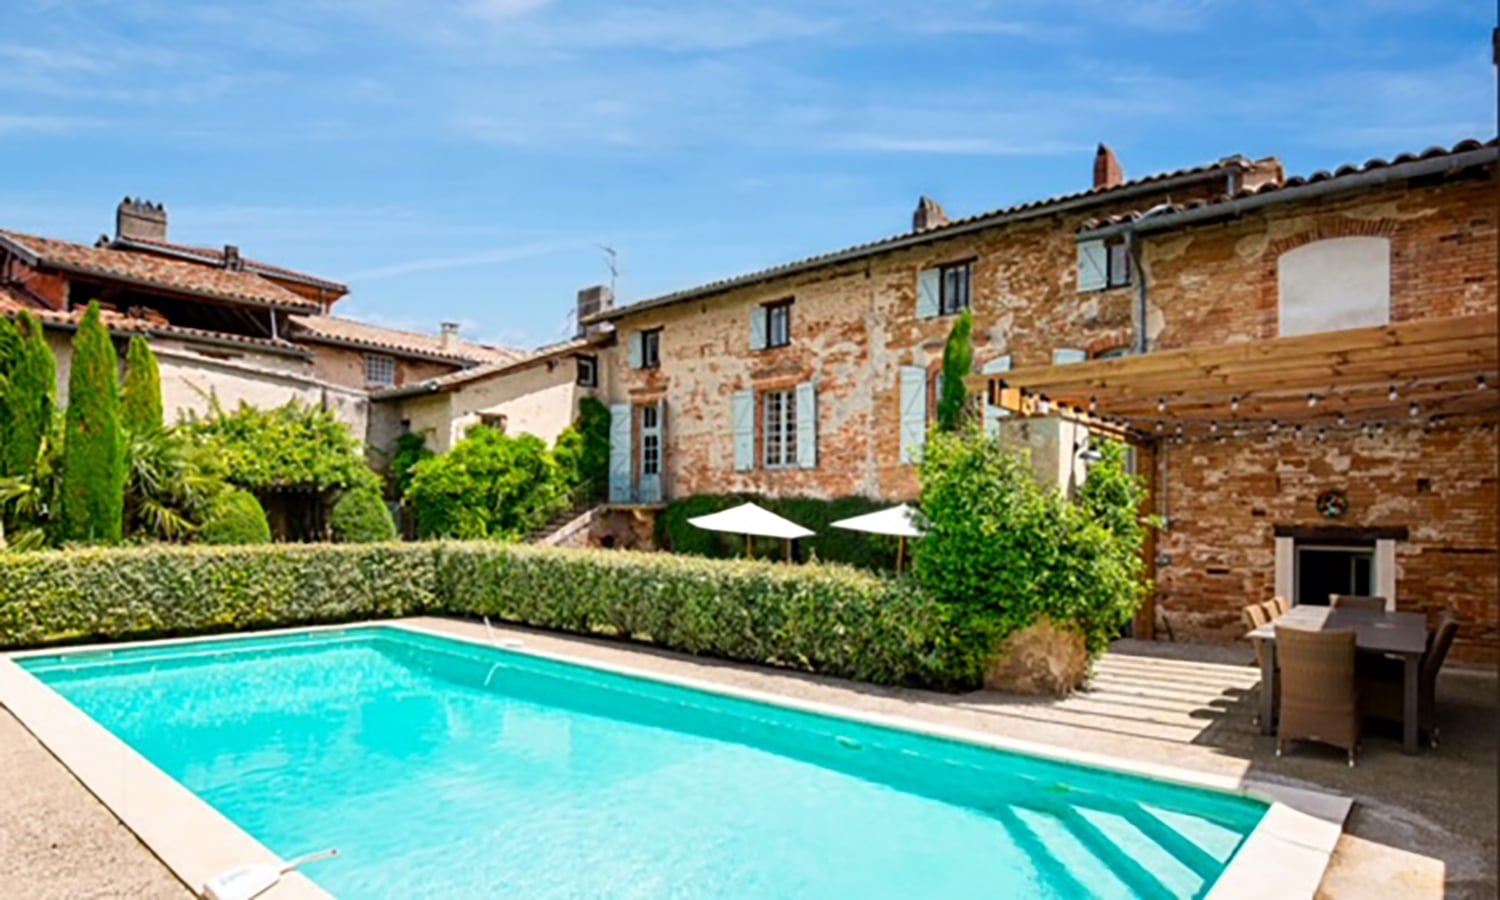 South West France holiday accommodation with private pool